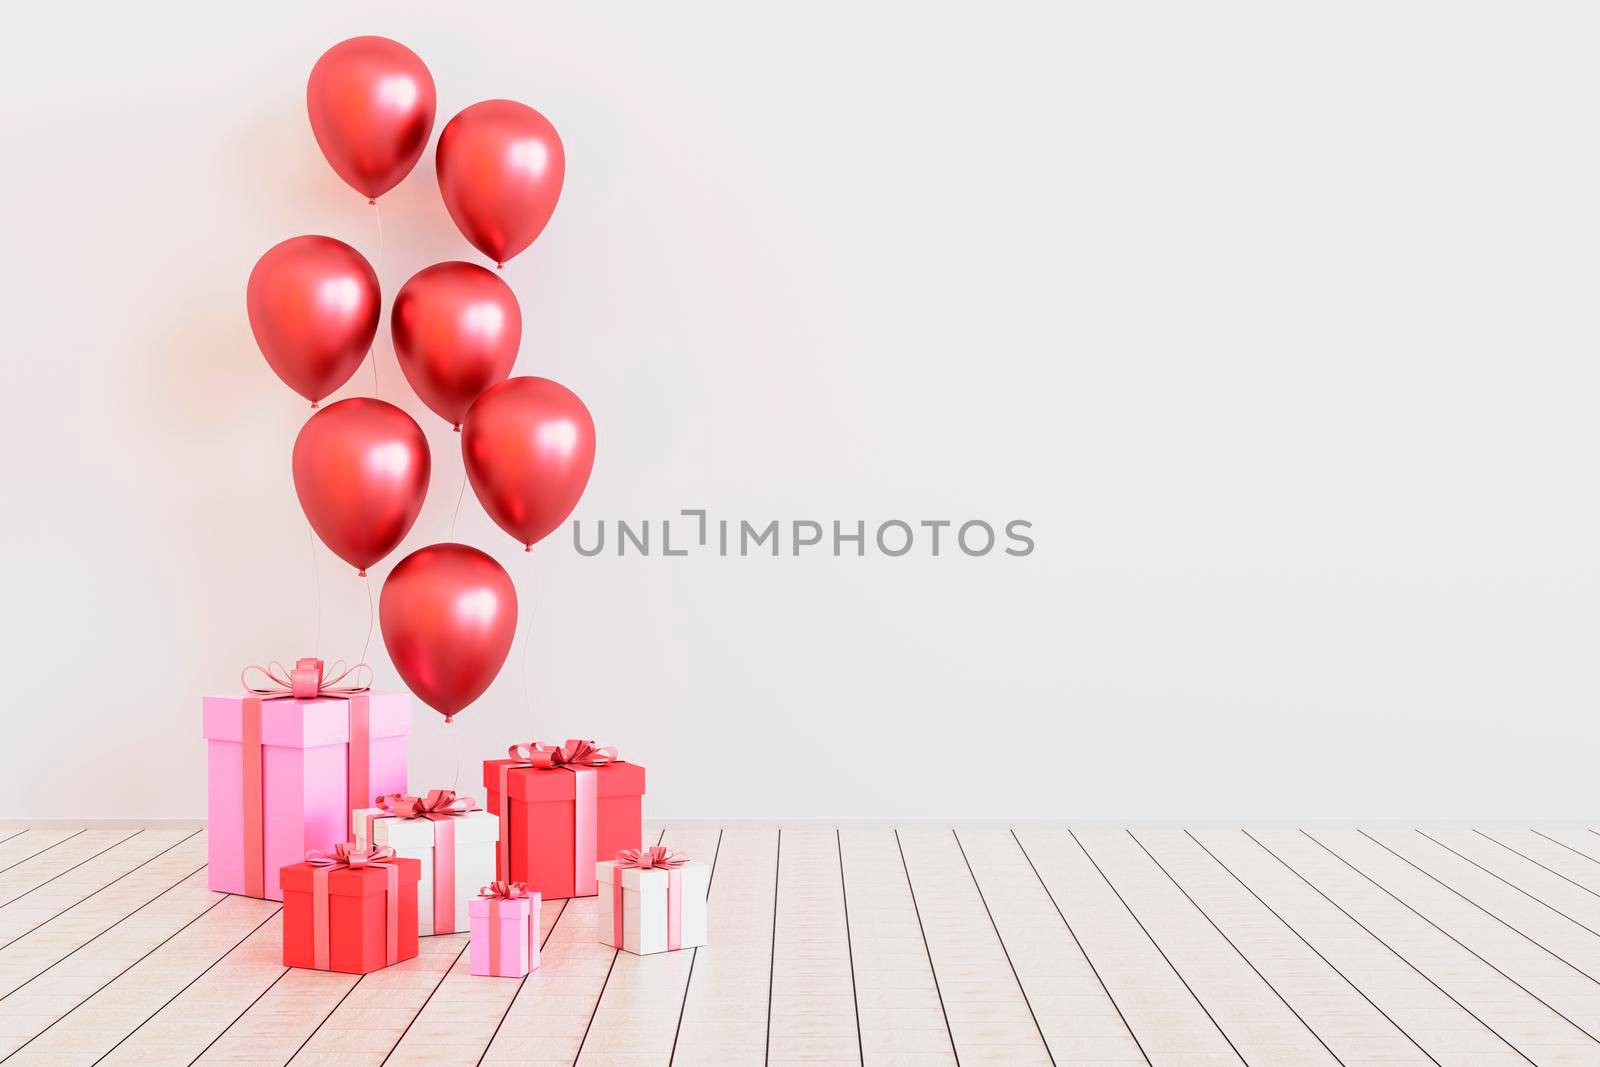 Set of red glossy balloons and gift boxes. Valentine's Day or wedding day romantic background for party, events, presentation or promotion banner, posters.3d illustration